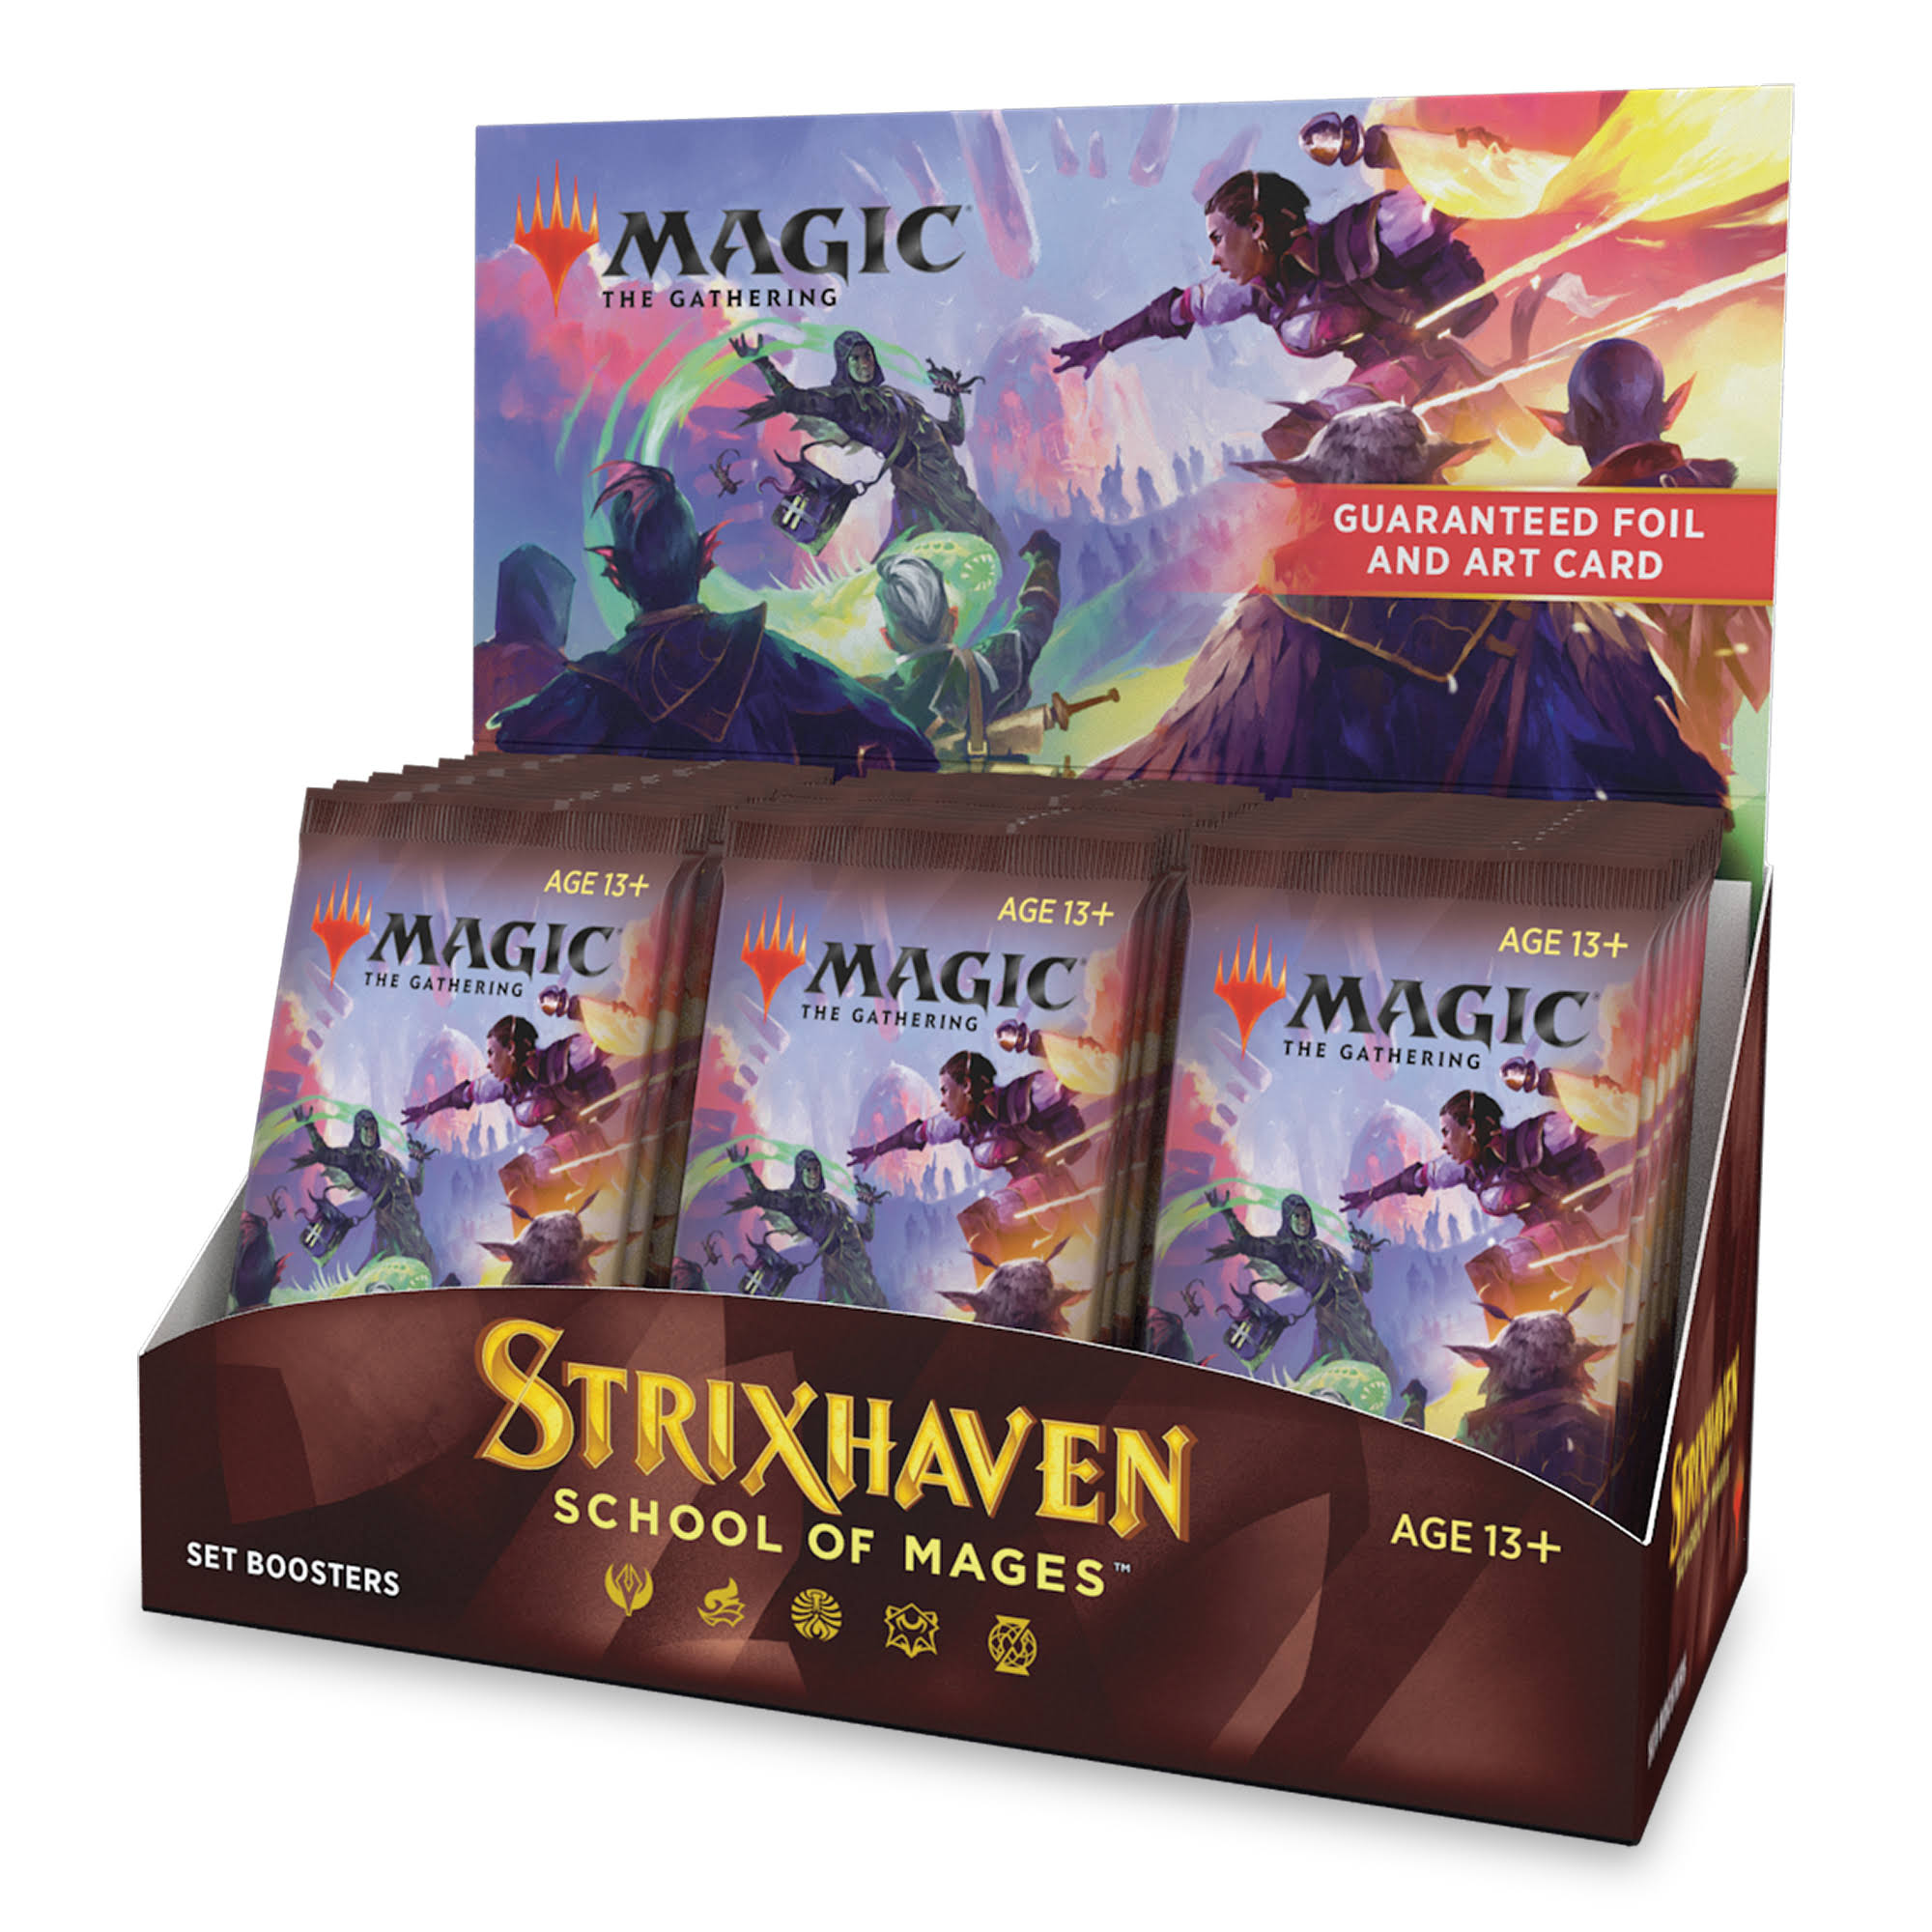 Magic The Gathering Set Booster Box - Strixhaven: School of Mages